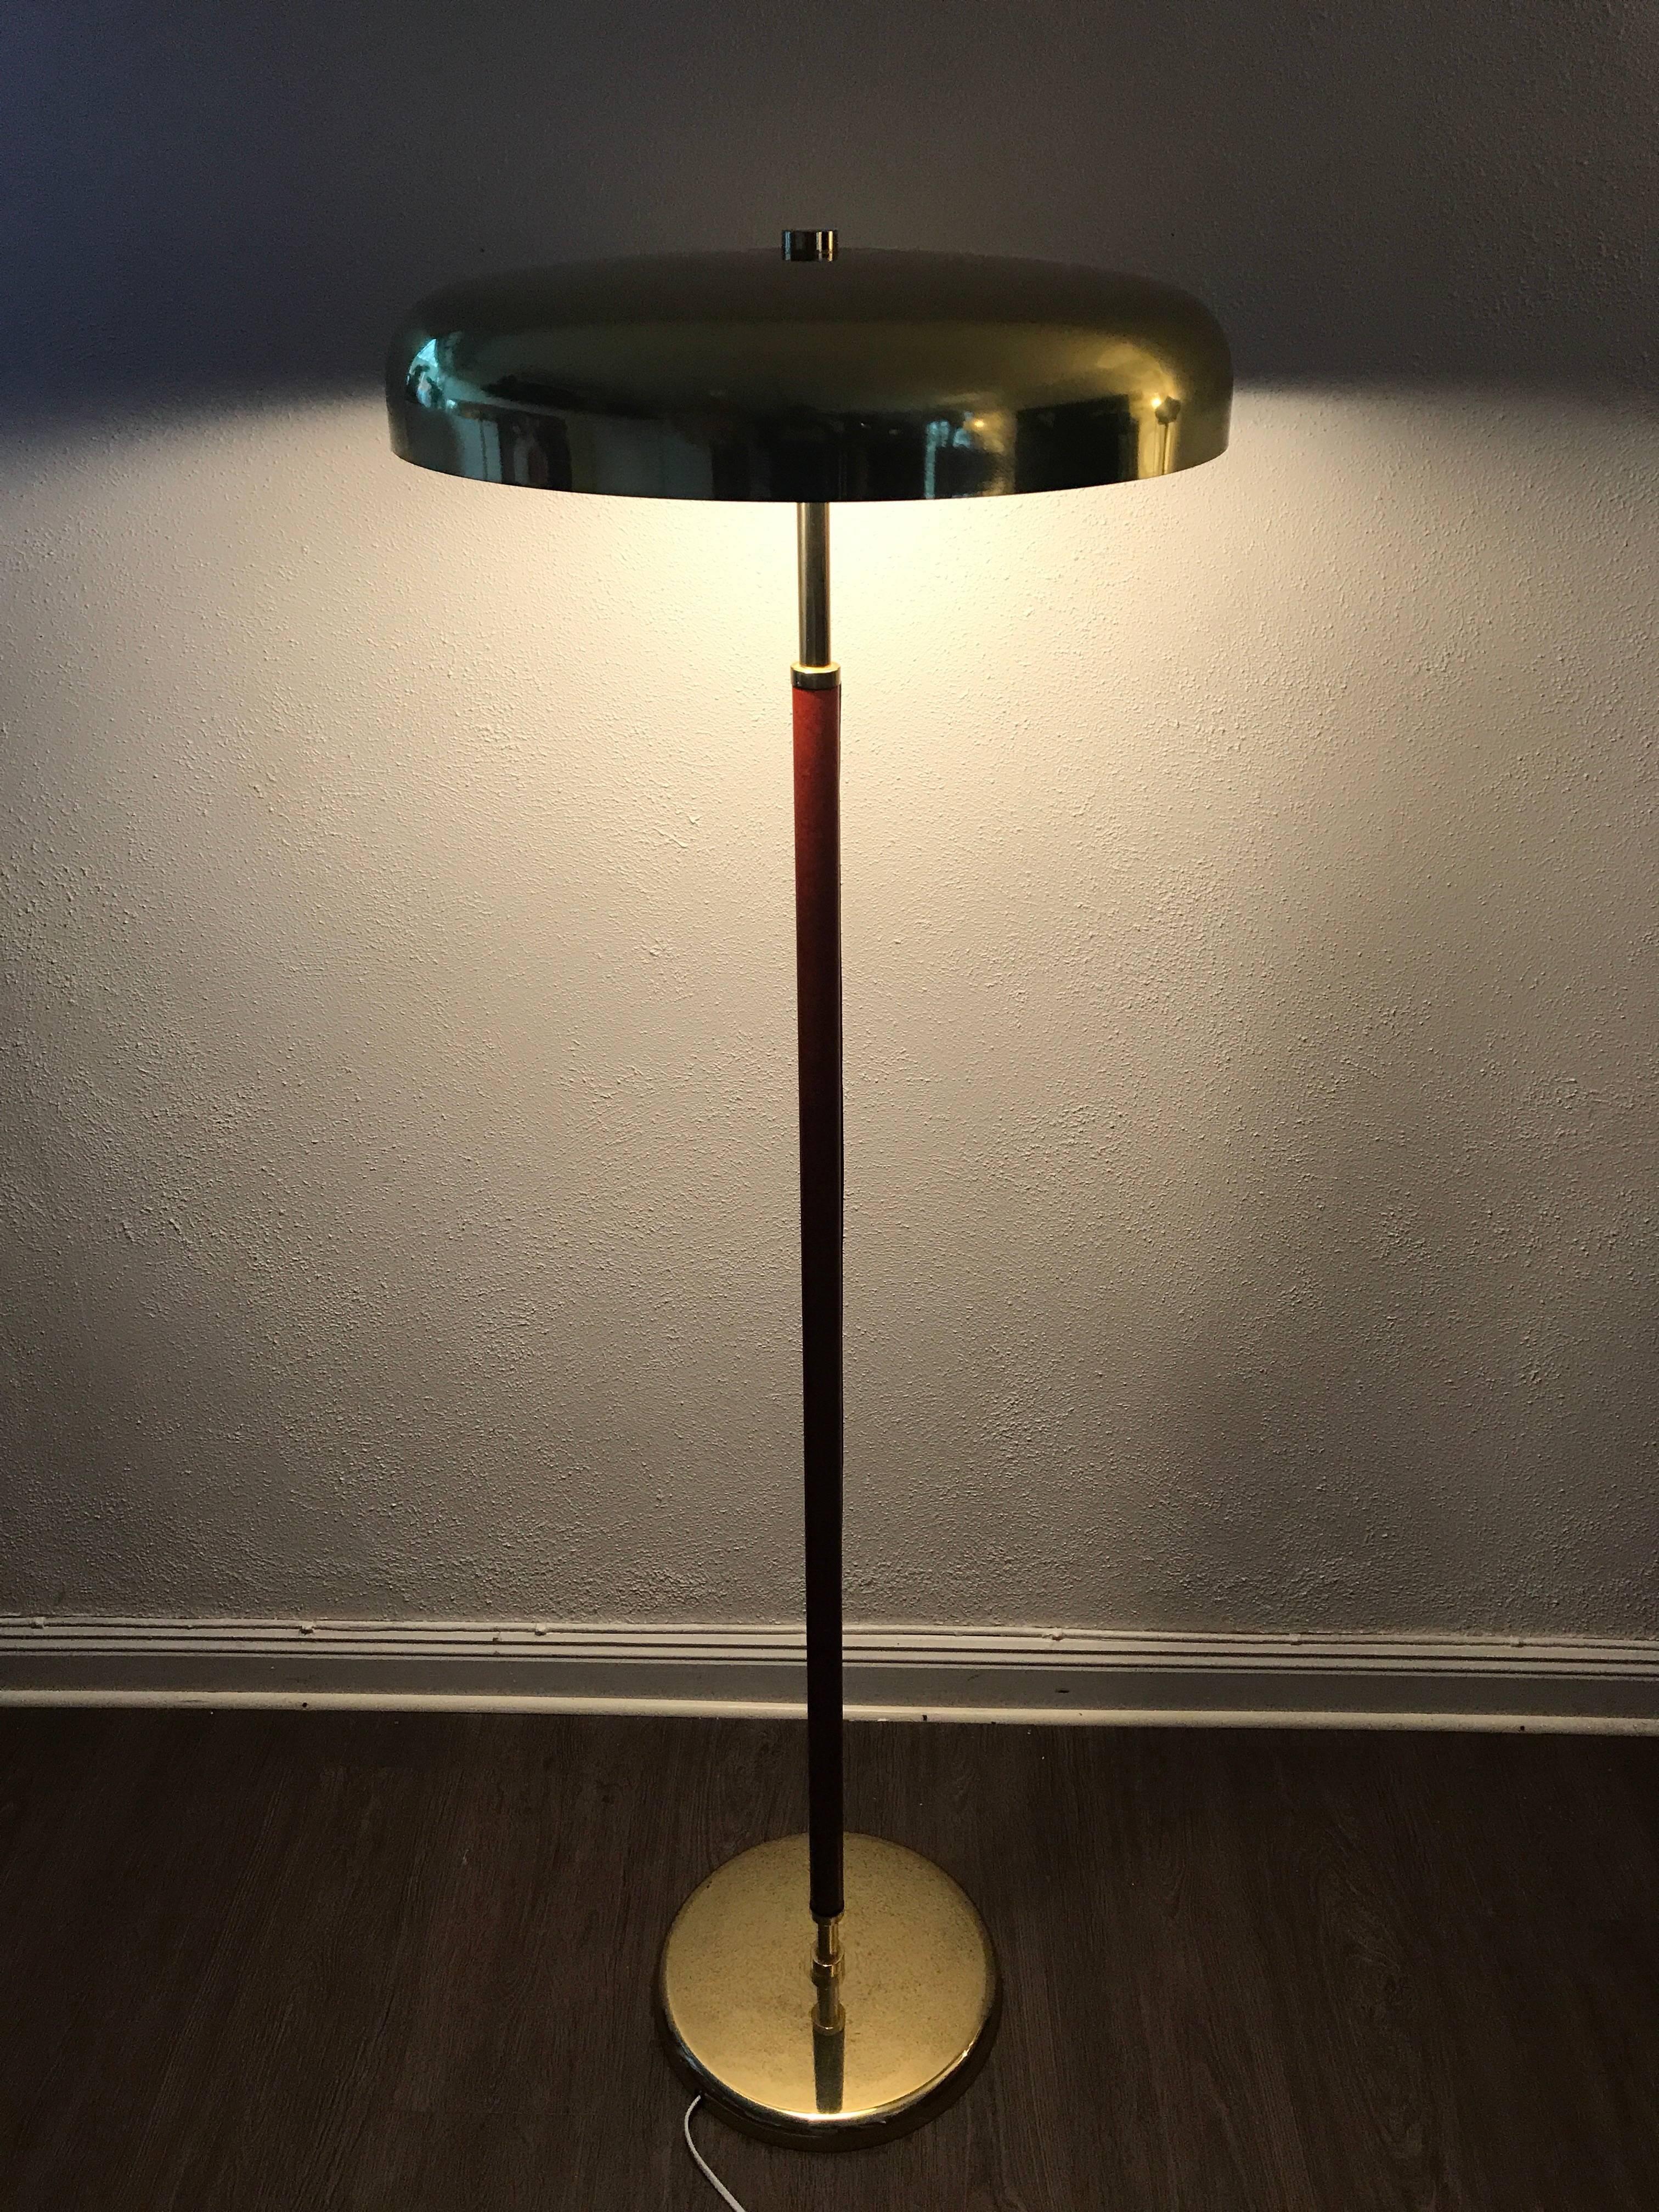 Polished Very Rare Exclusive Swedish Brass and Leather Floor Lamp by Örsjö Industri AB For Sale